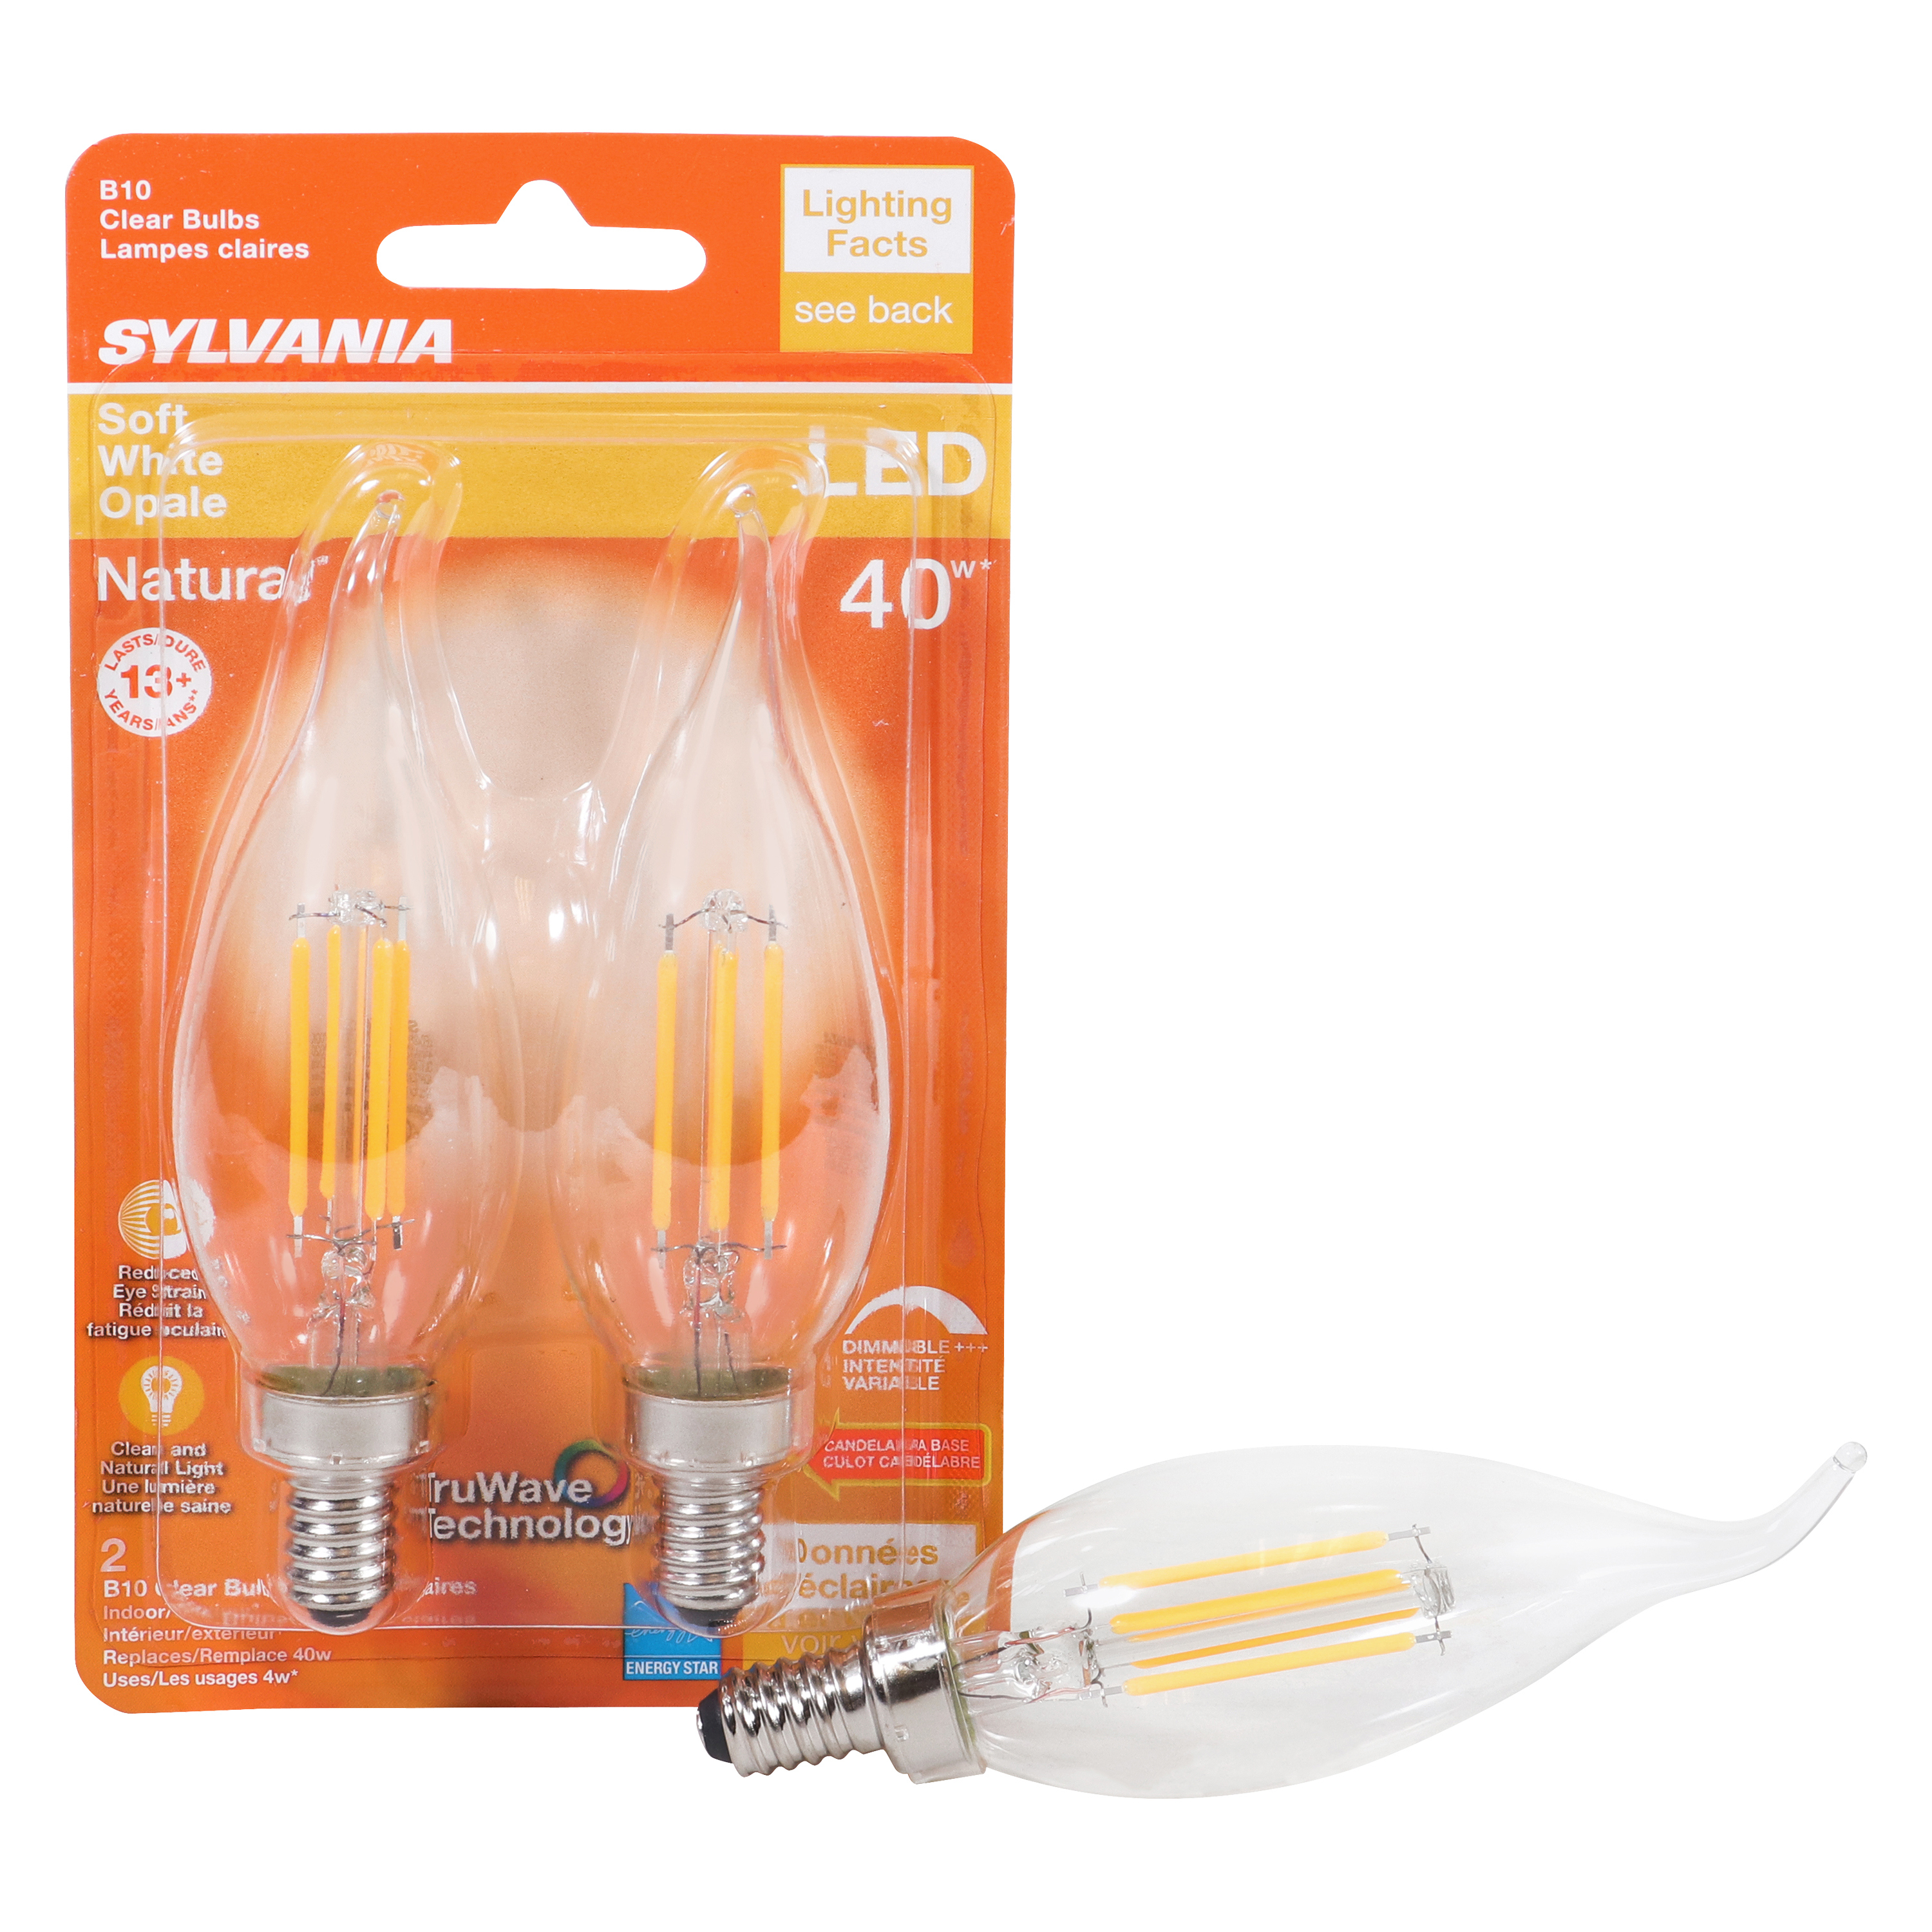 40755 Natural LED Bulb, Decorative, B10 Bent Tip Lamp, 40 W Equivalent, E12 Lamp Base, Dimmable, Clear